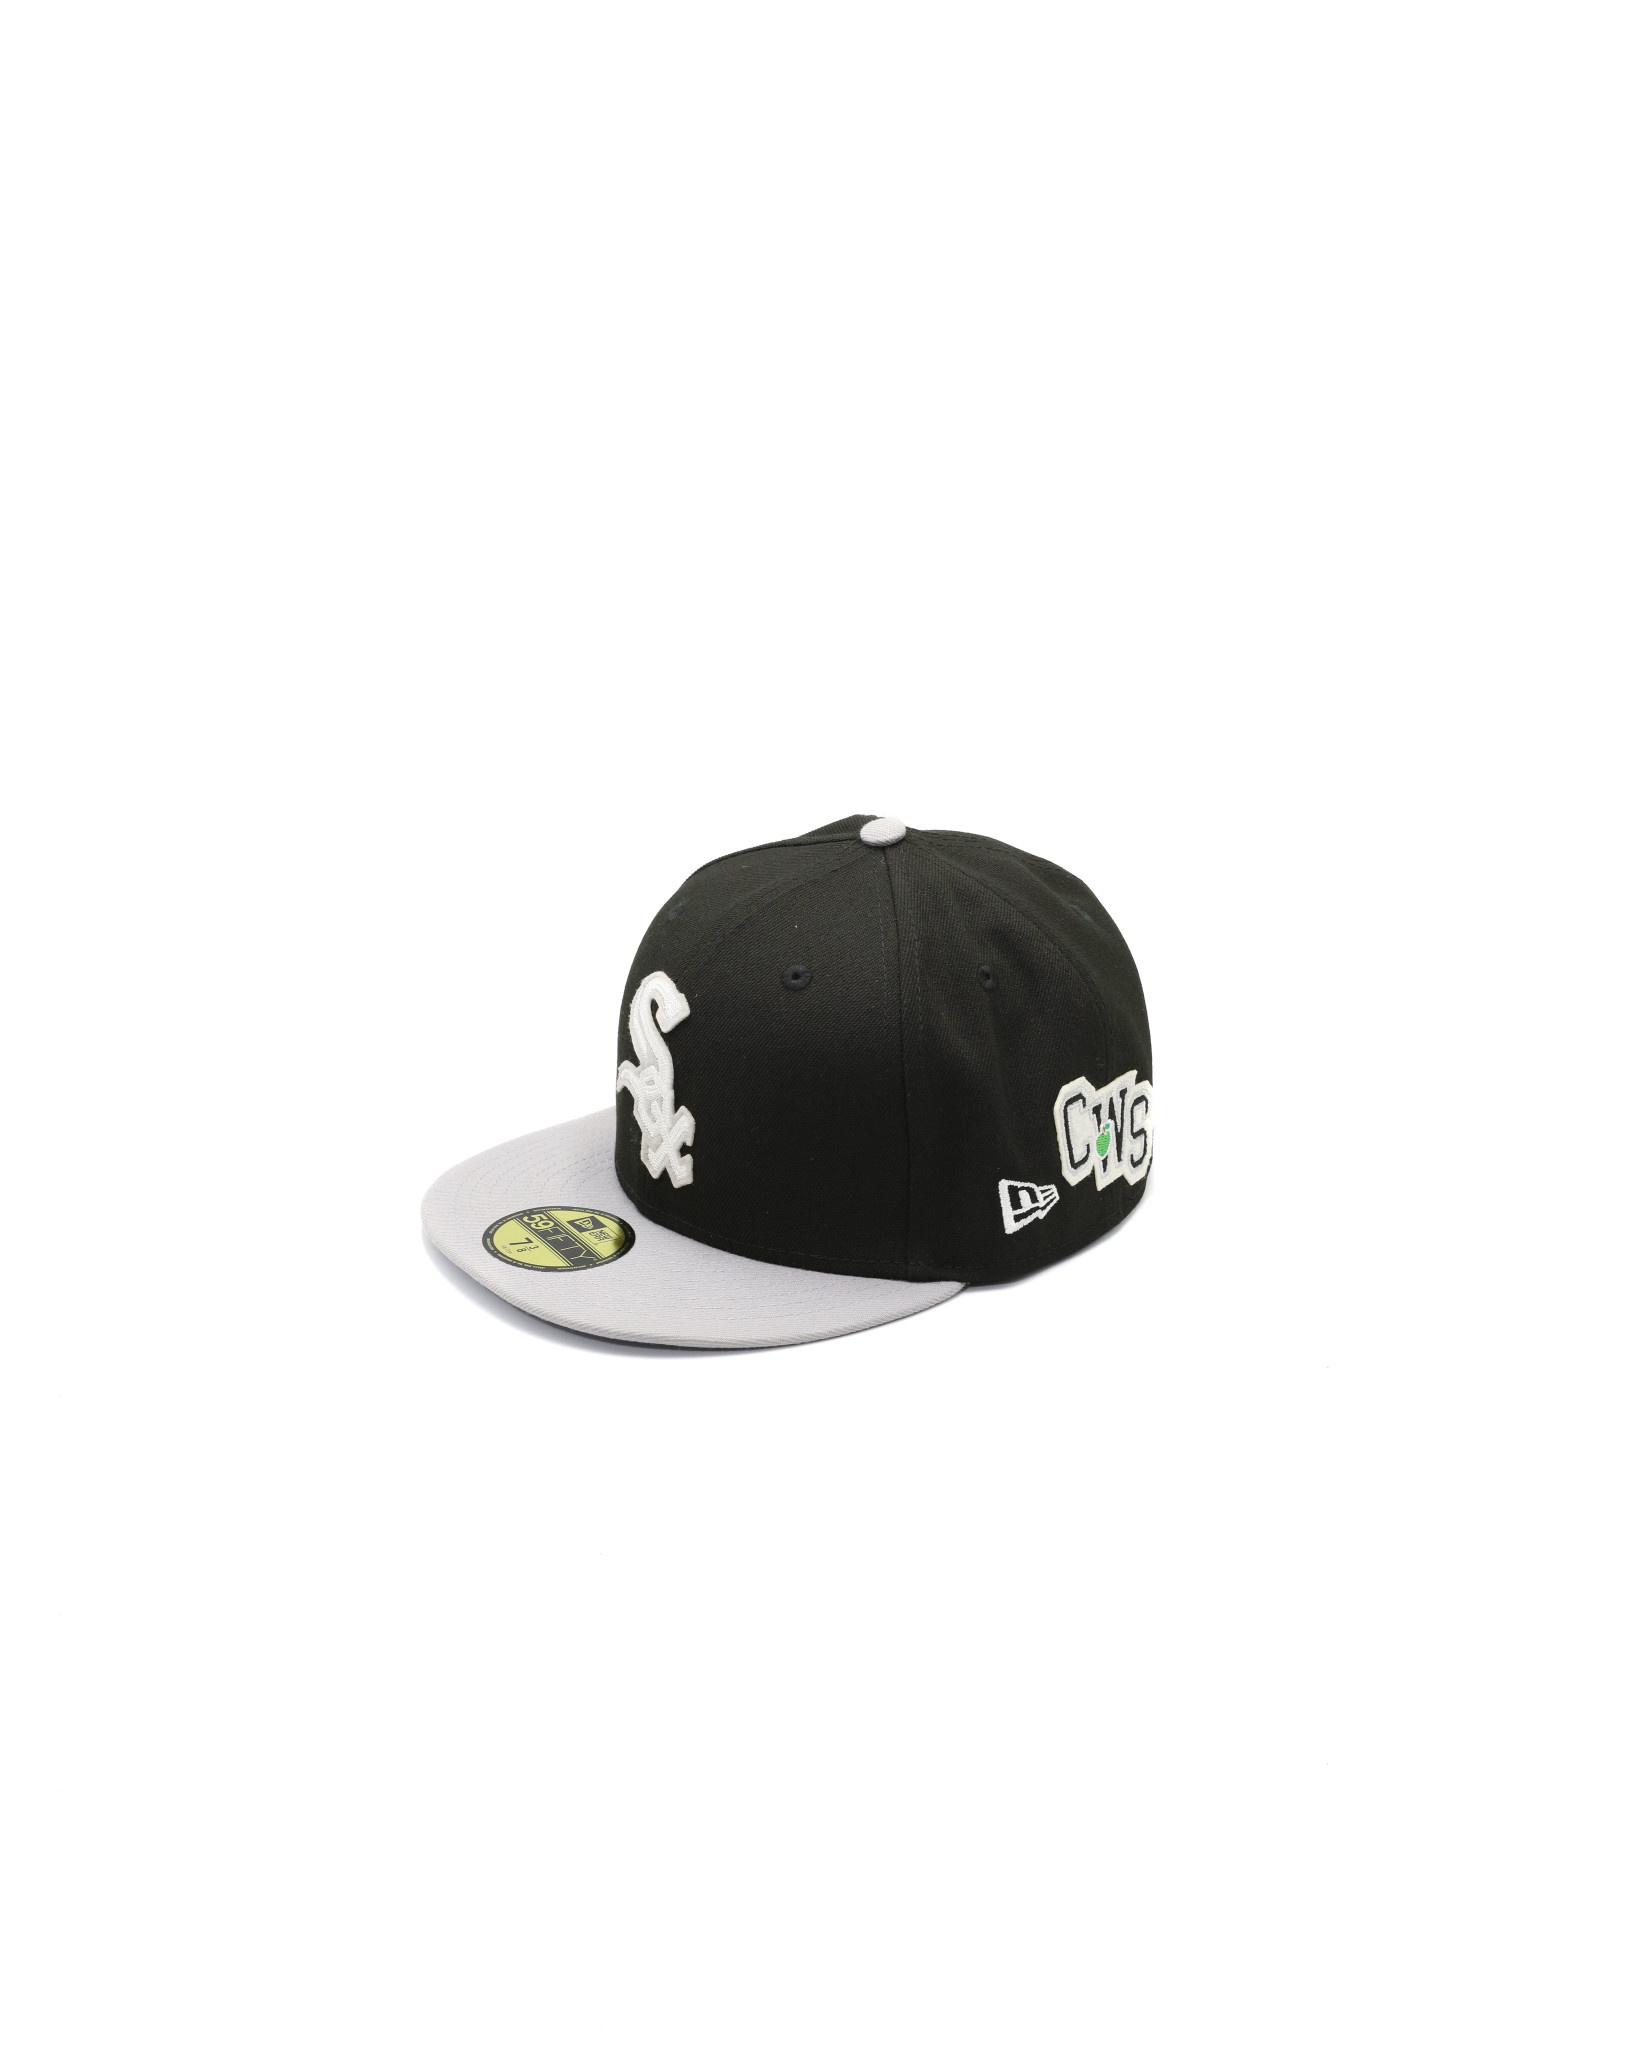 Chicago White Sox New Era 3x World Series Champions 59FIFTY Fitted Hat -  Black